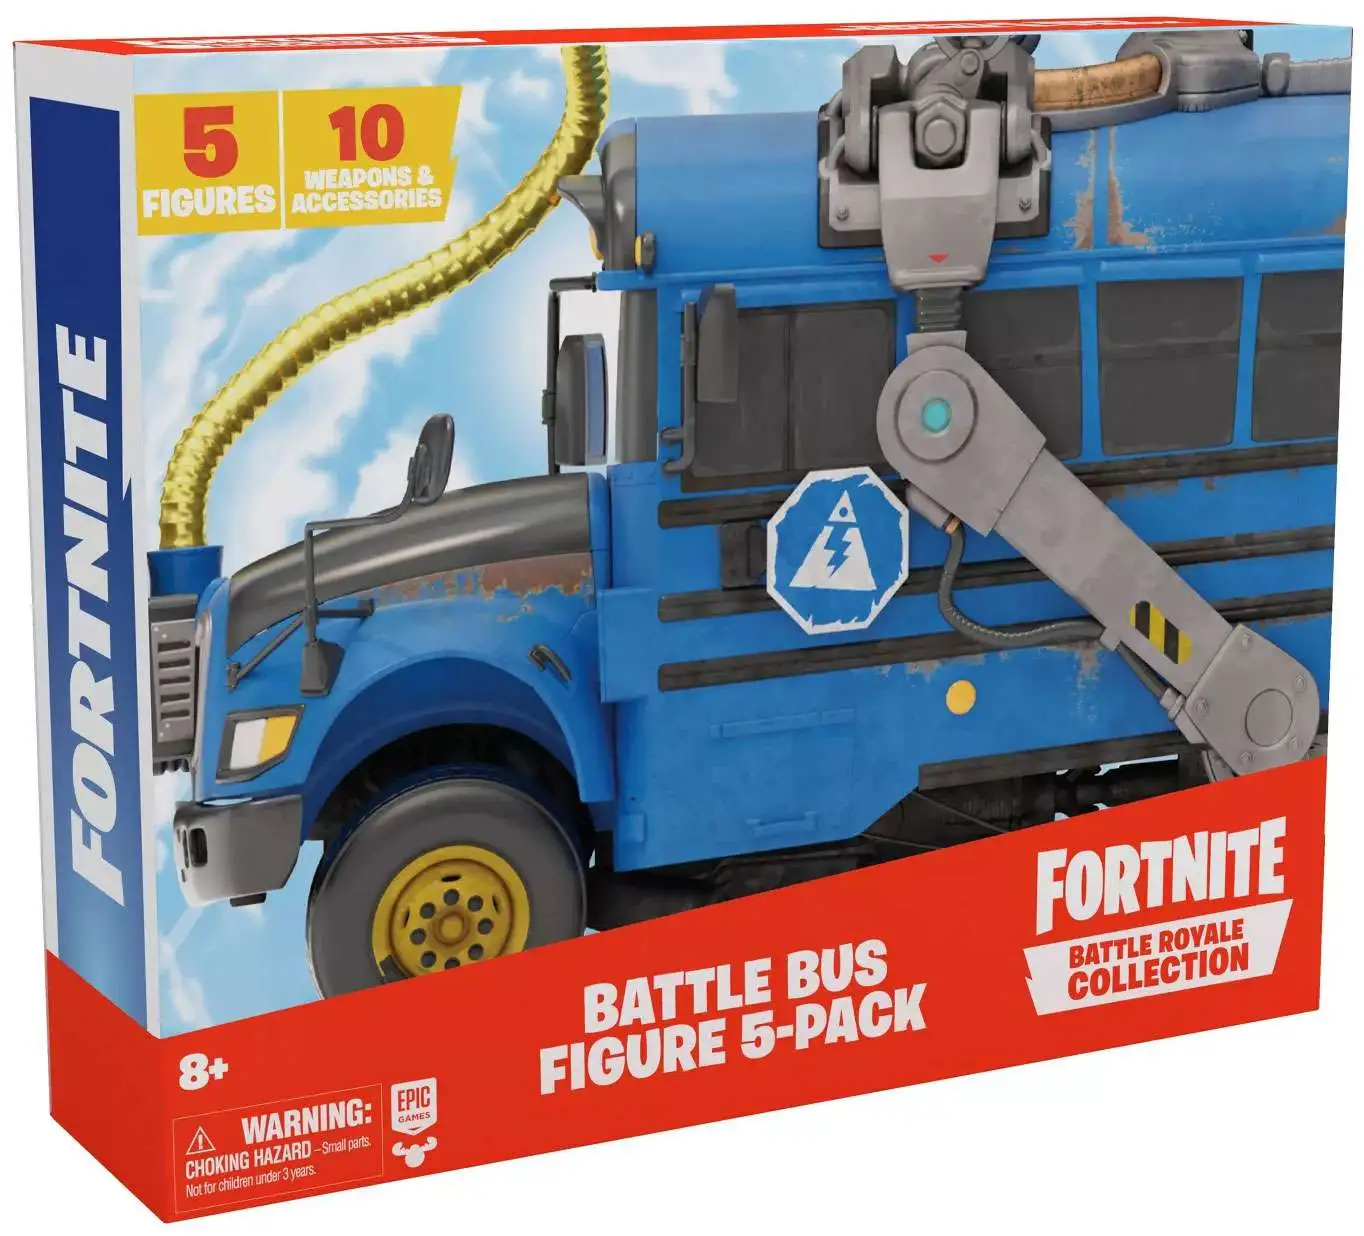 Fortnite Battle Bus Figure 5 Pack Royale Collection Unboxed for sale online 